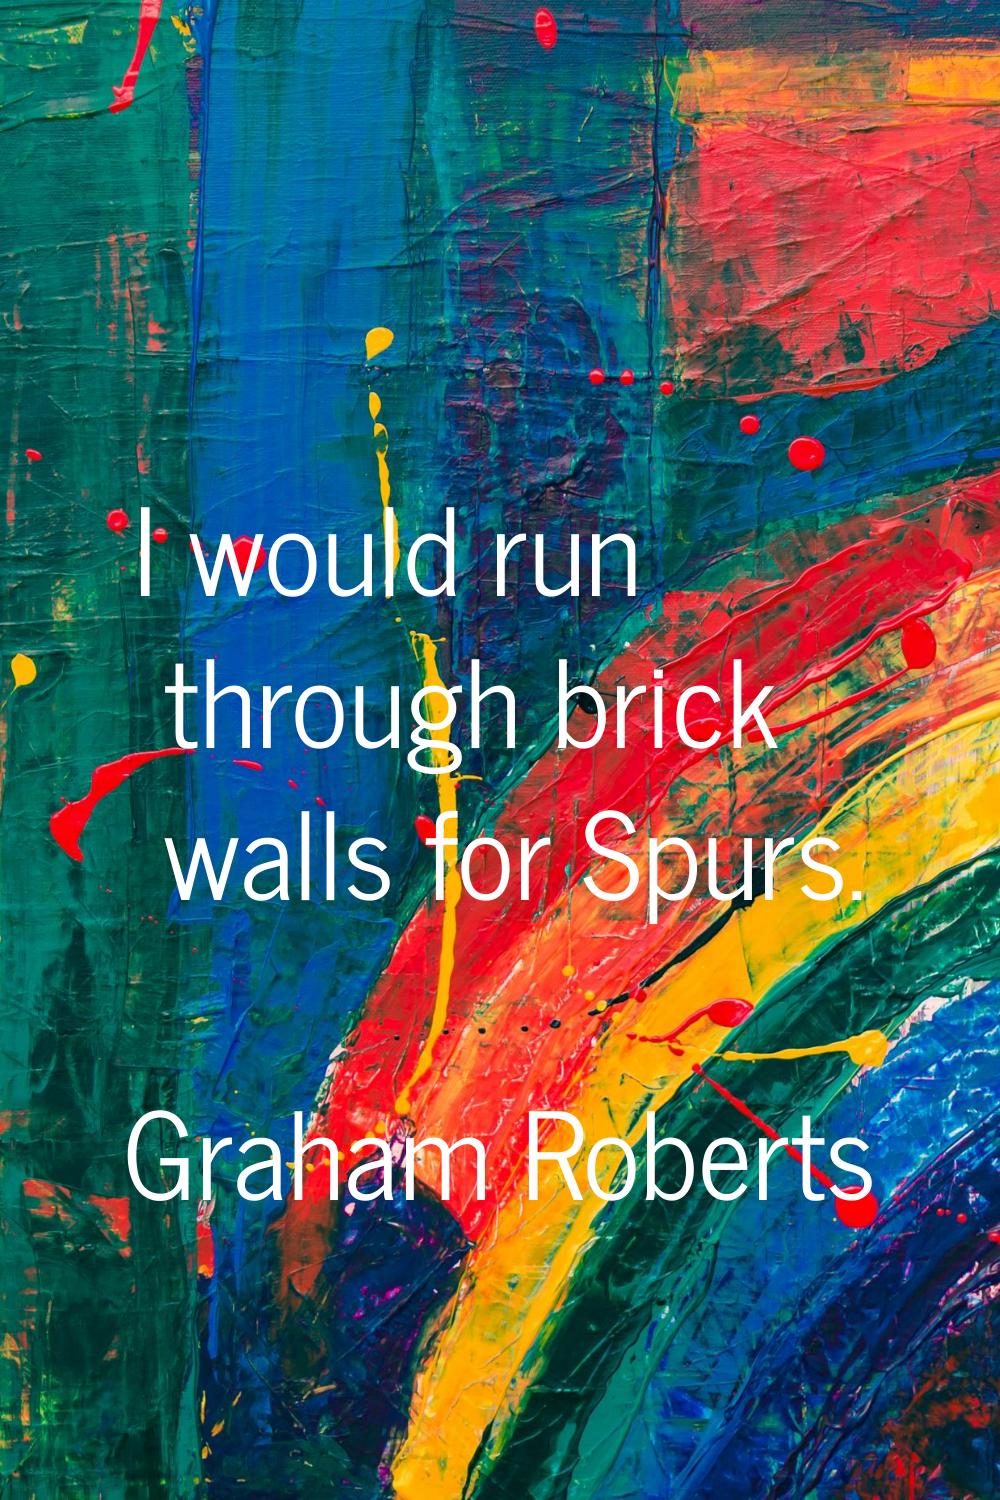 I would run through brick walls for Spurs.